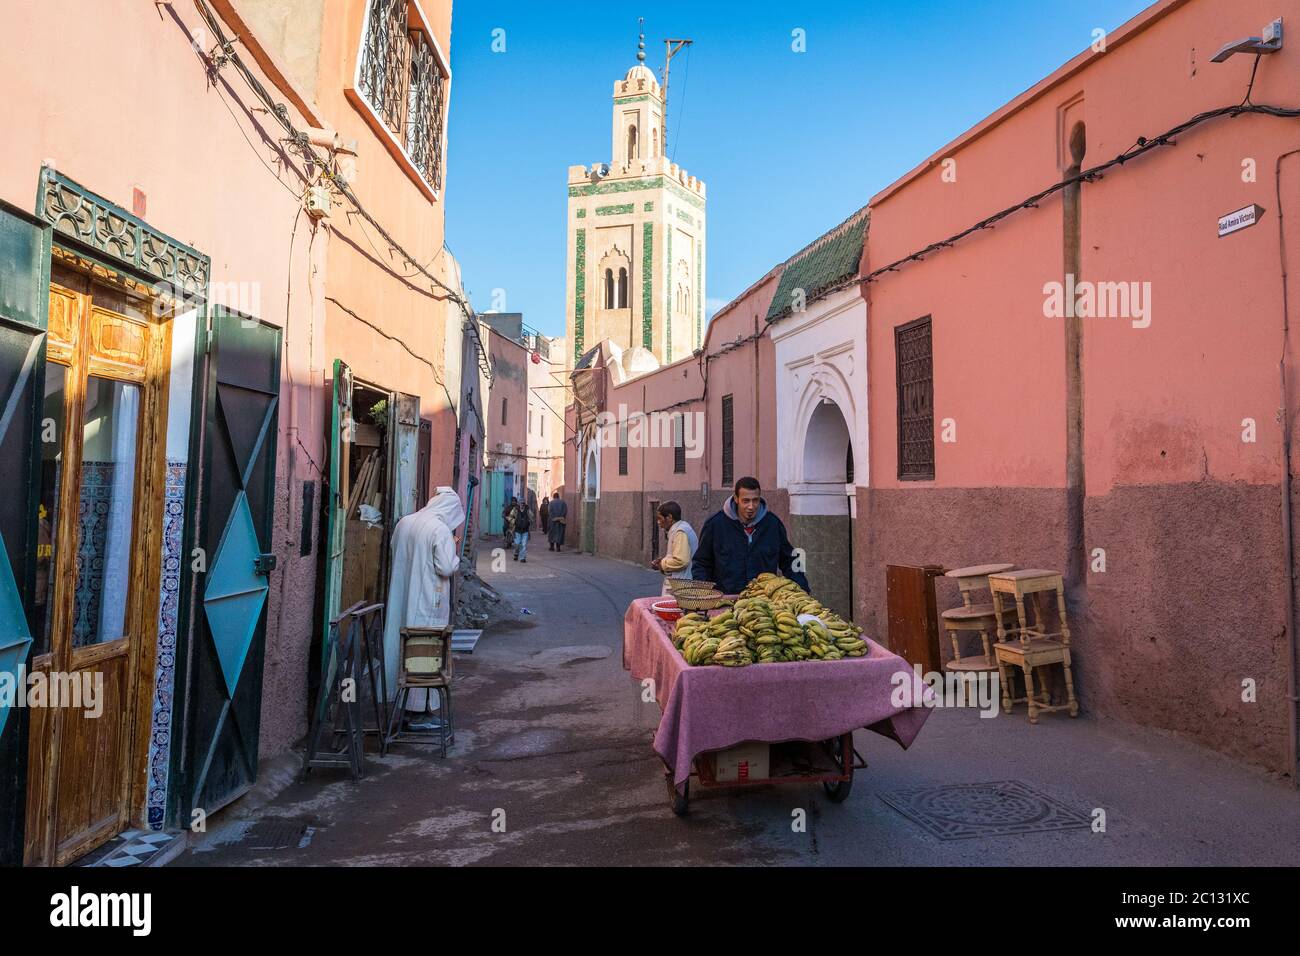 Man with a transport cart or trolley selling bananas, street scene in the old city, the Medina, Marrakech, Morocco, Africa Stock Photo